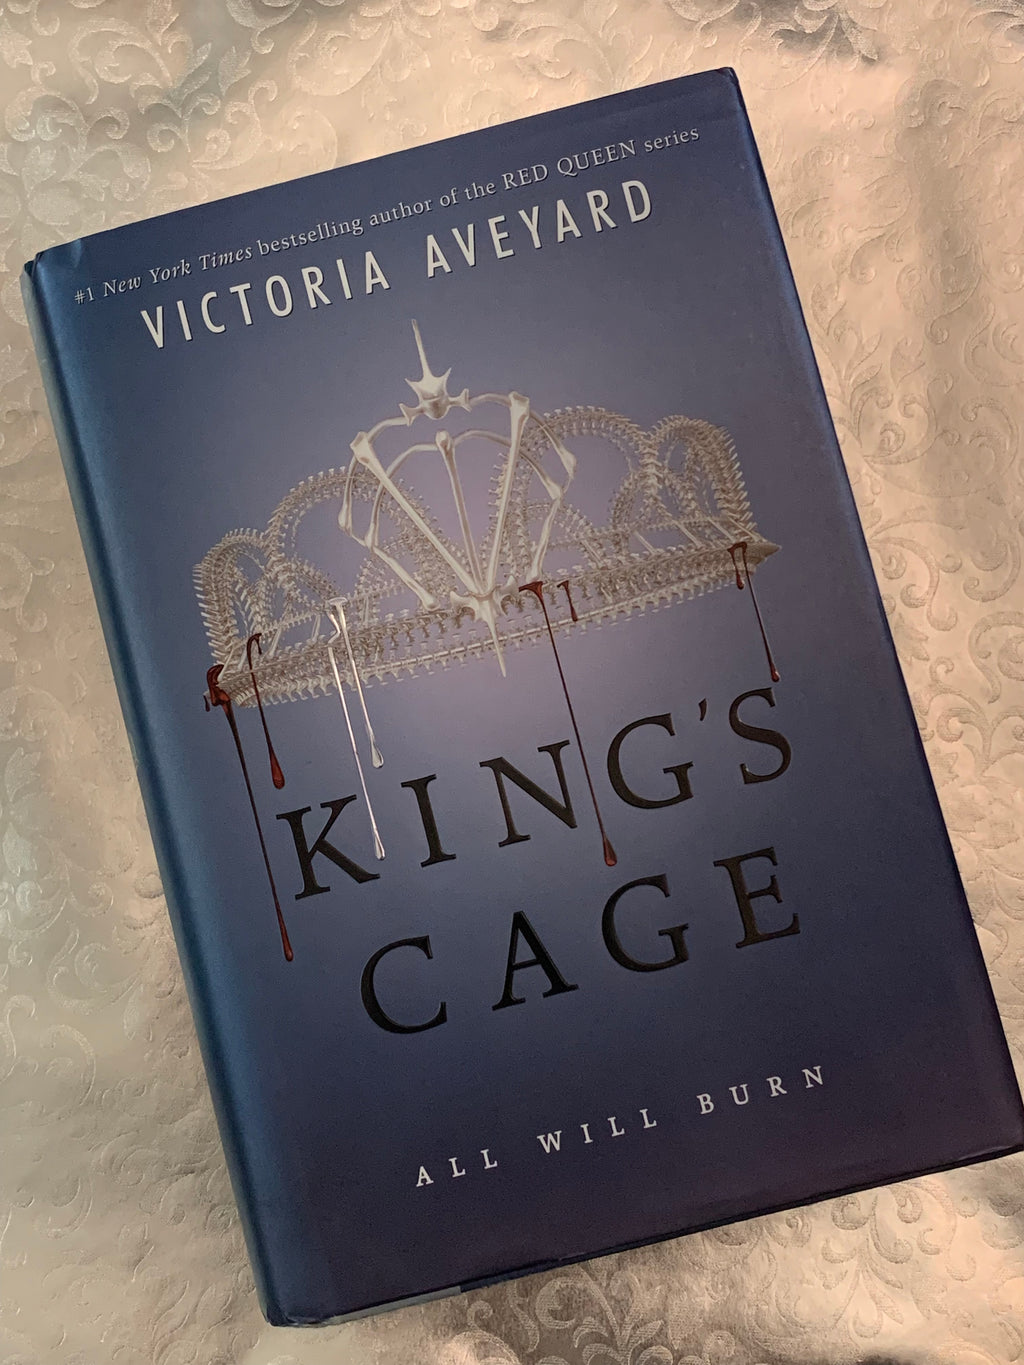 King's Cage: All Will Burn- By Victoria Aveyard